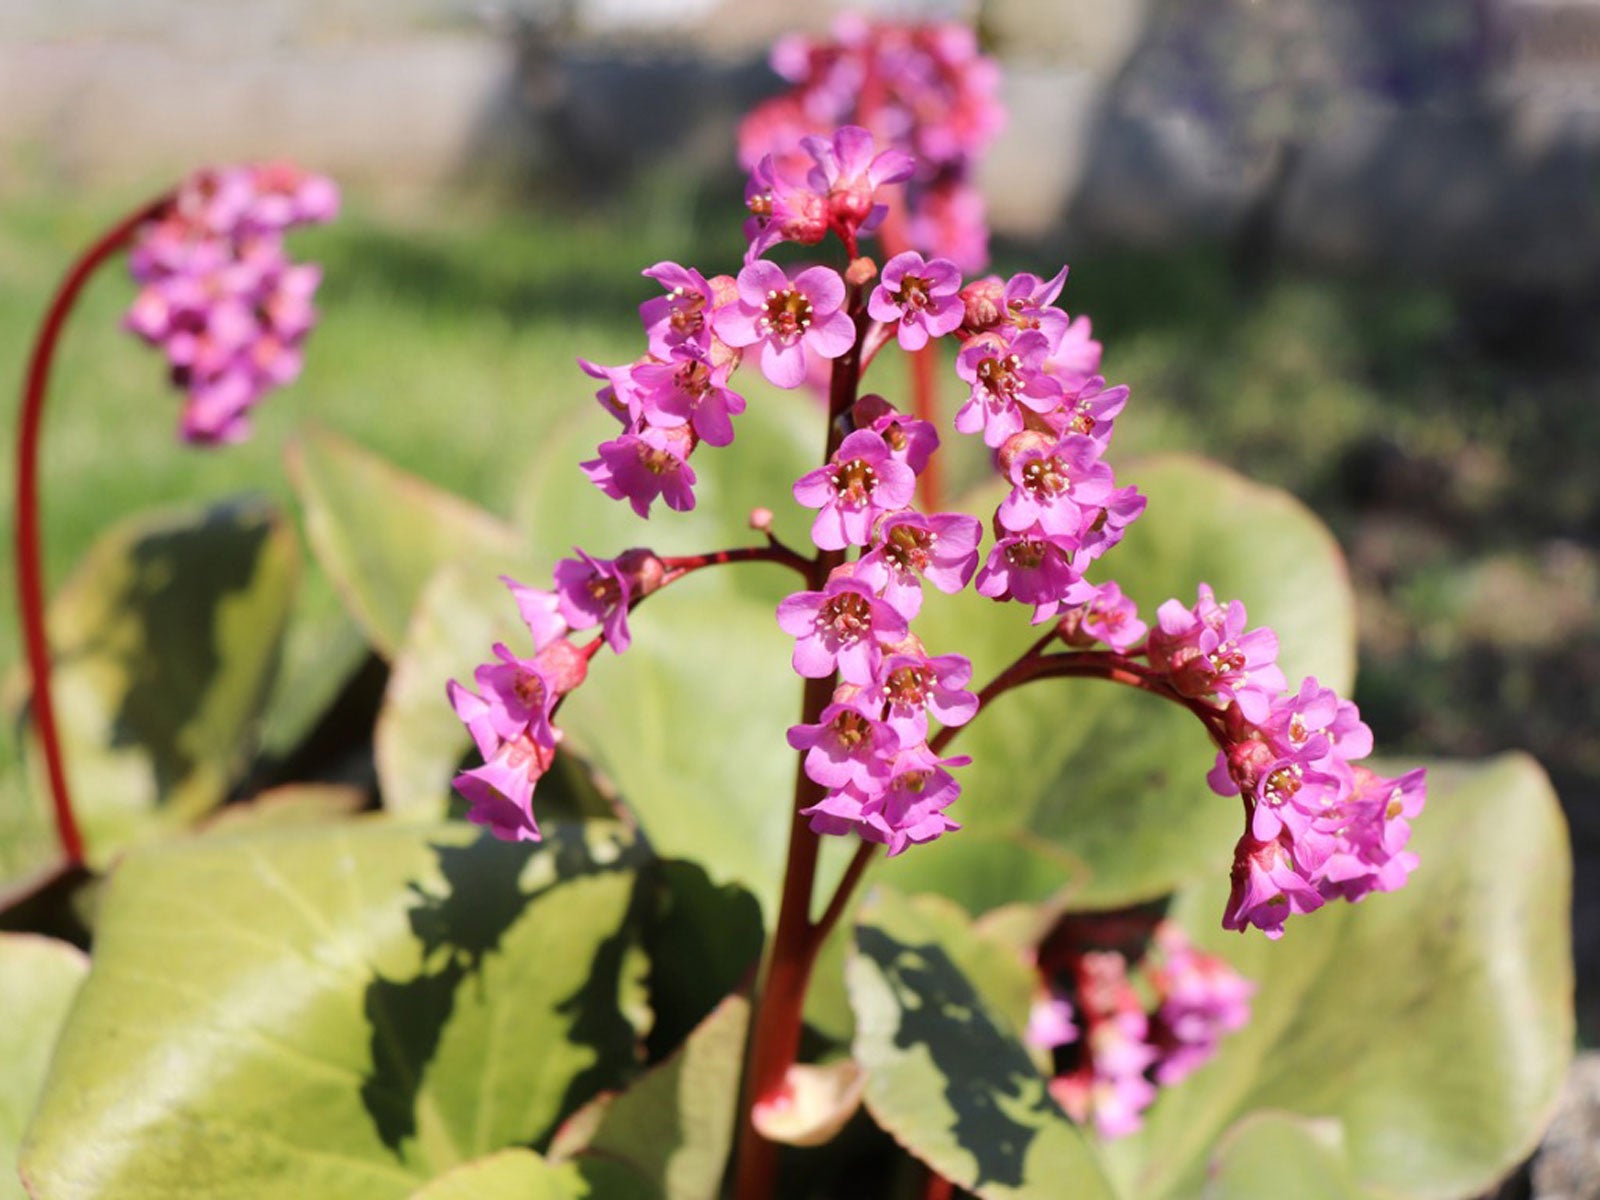 bergenia plants care - tips for growing bergenia plants